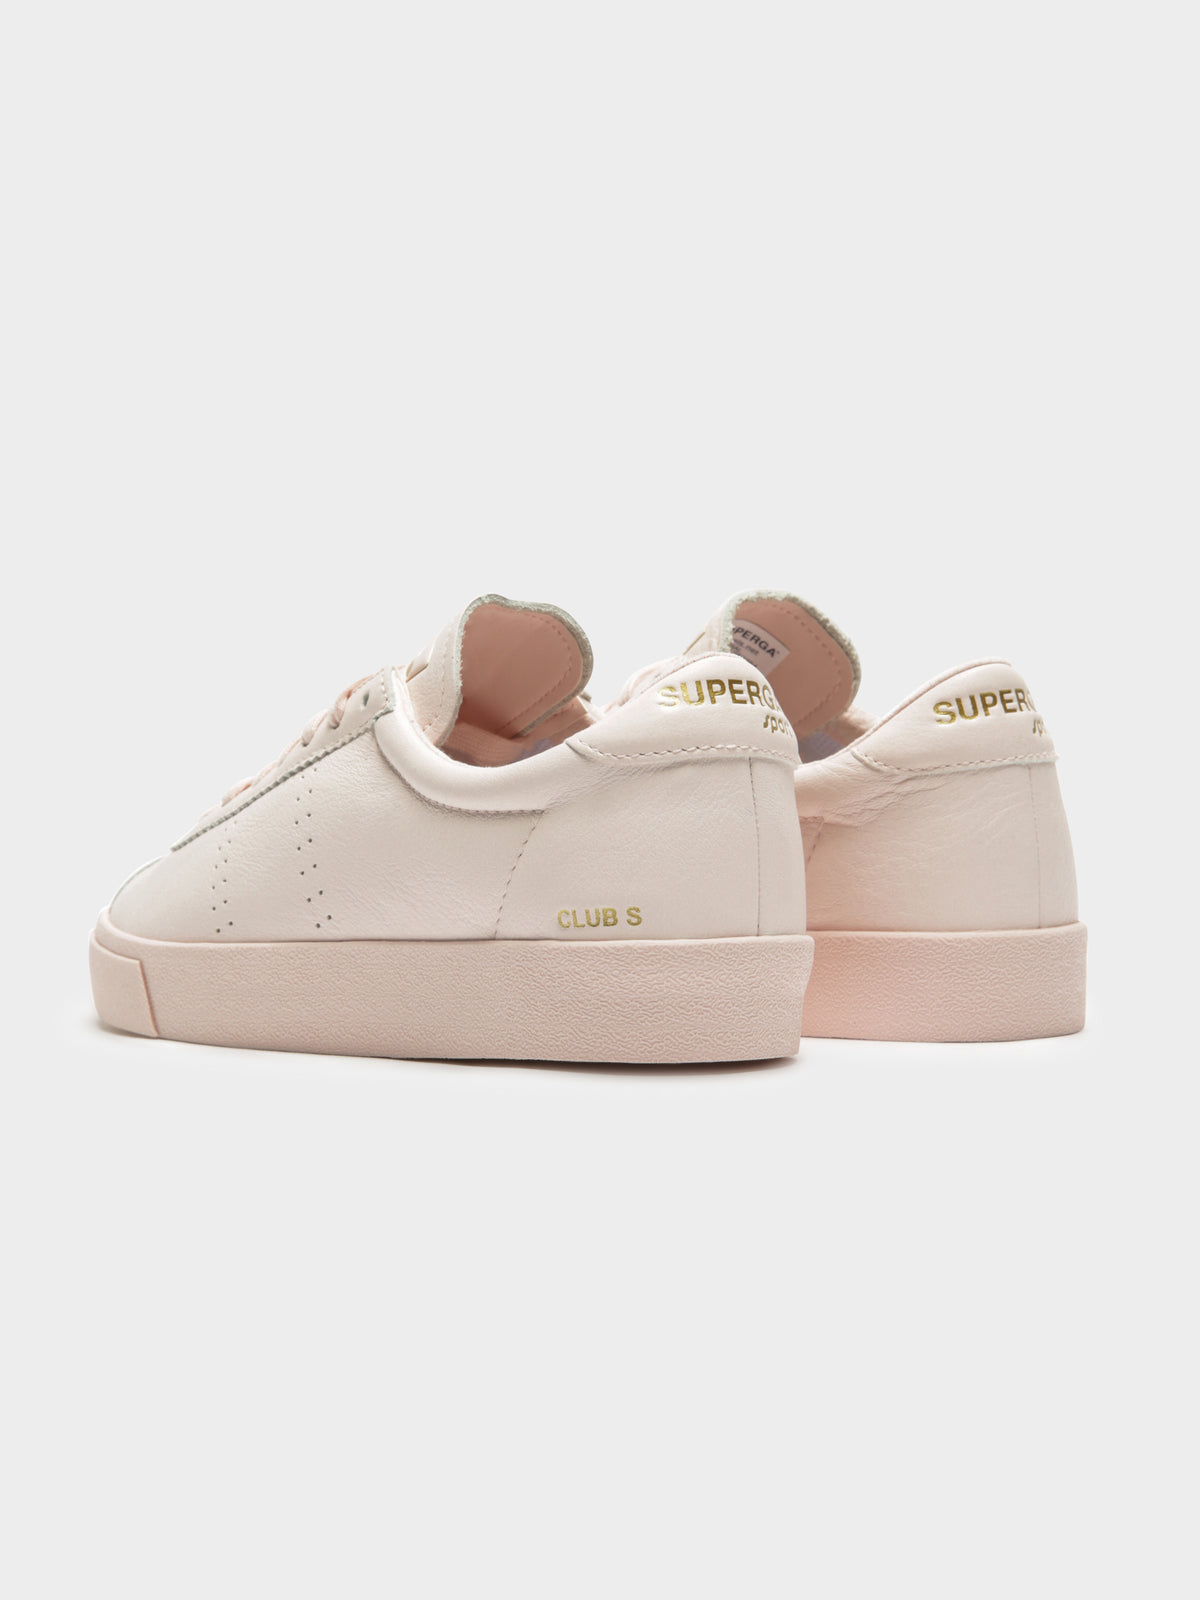 Womens 2843 Tumbled Leather Sneakers in Pink